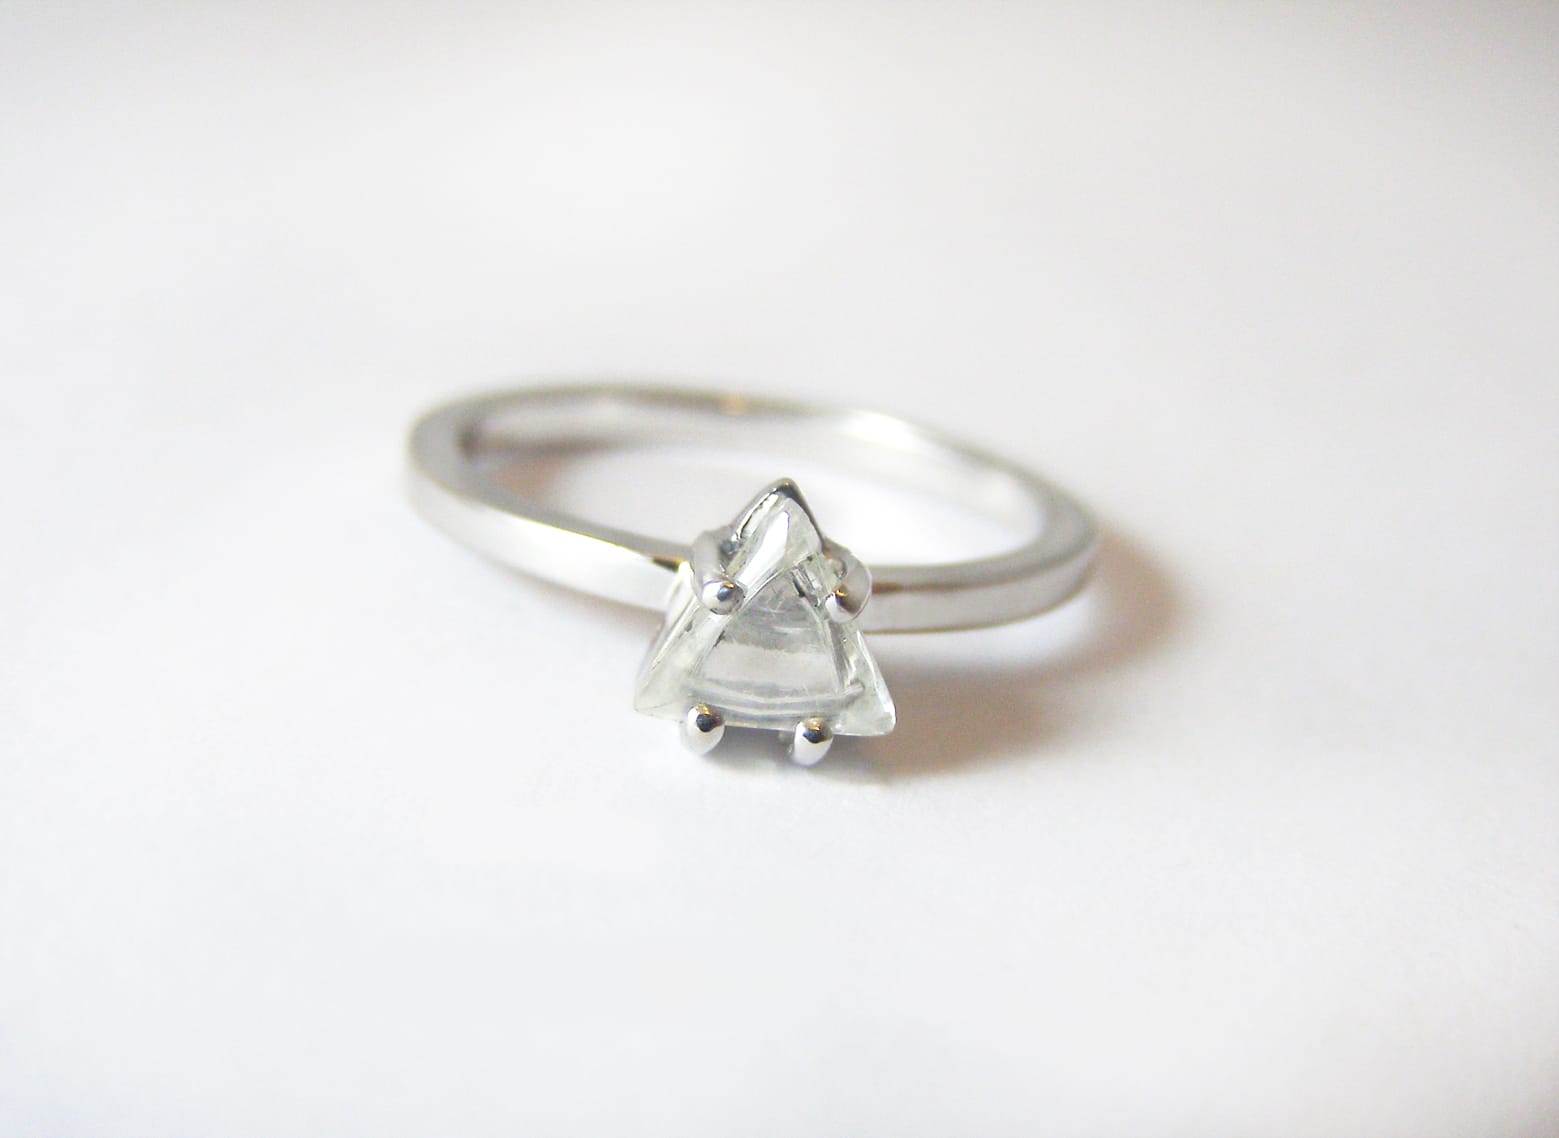 Rough macle diamond in 18ct Fairtrade white gold by Zoe Pook Jewellery